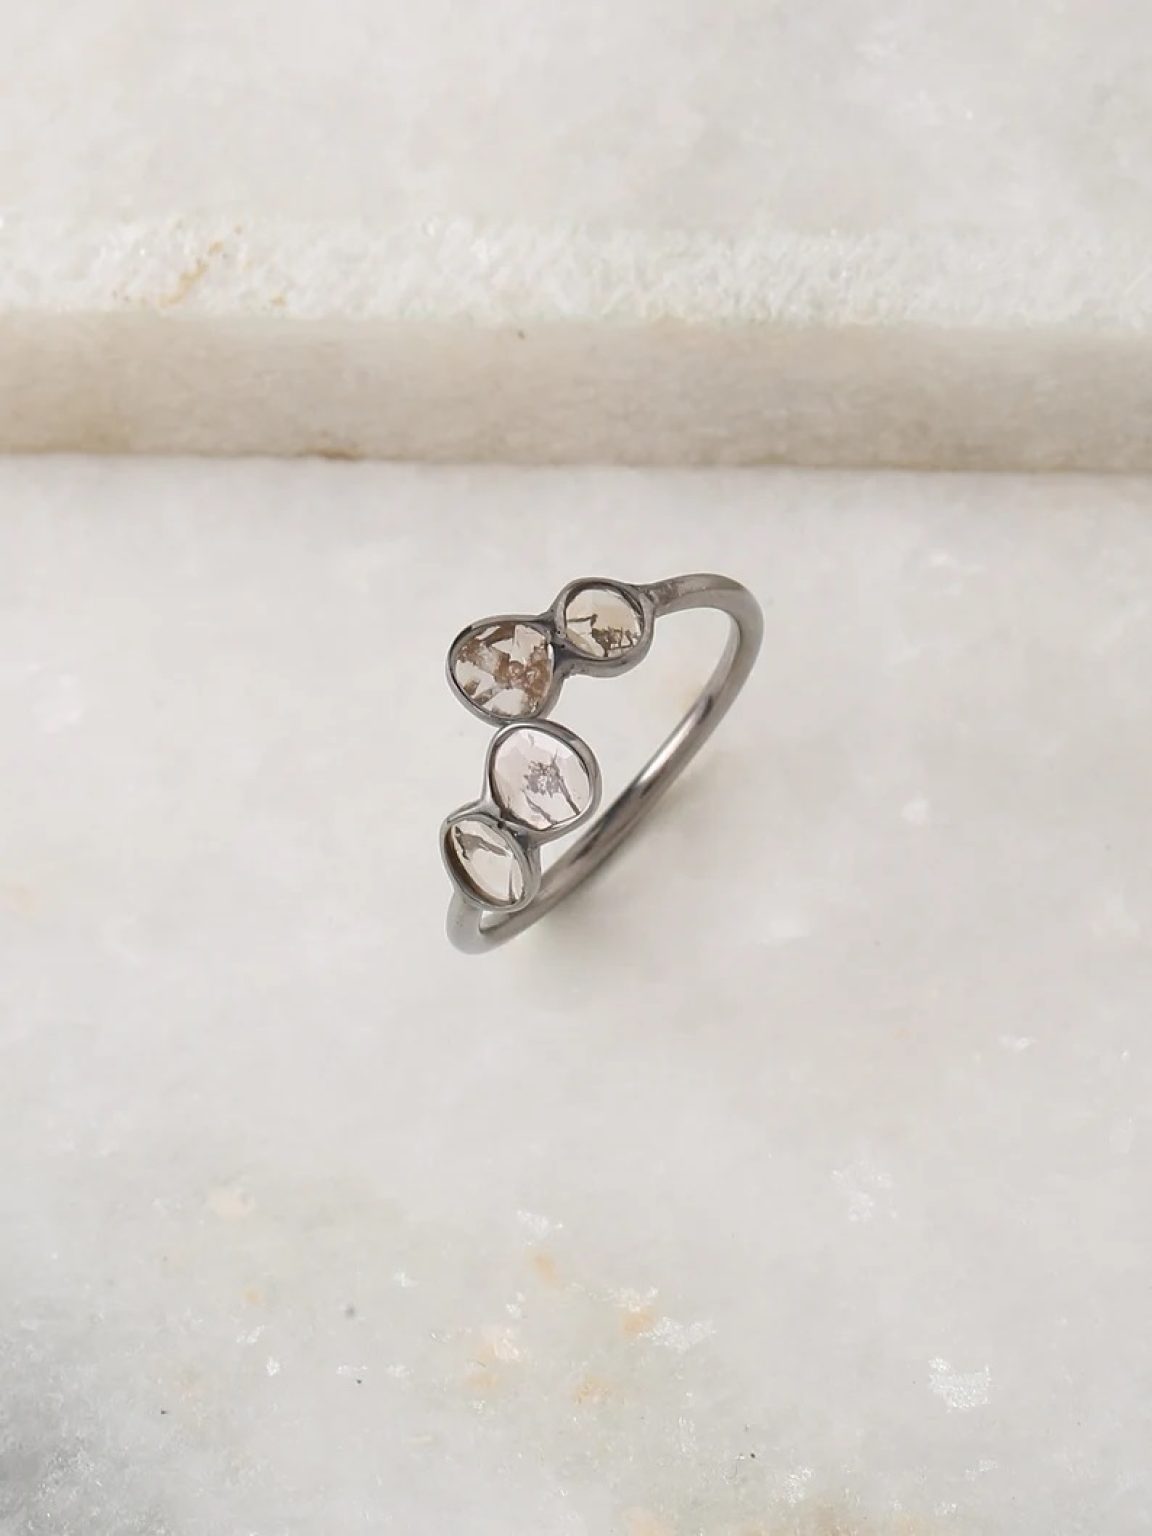 Uncut rose cut diamond ring in sterling silver. Minimalist diamond ring for women and girls. Casual diamond ring.